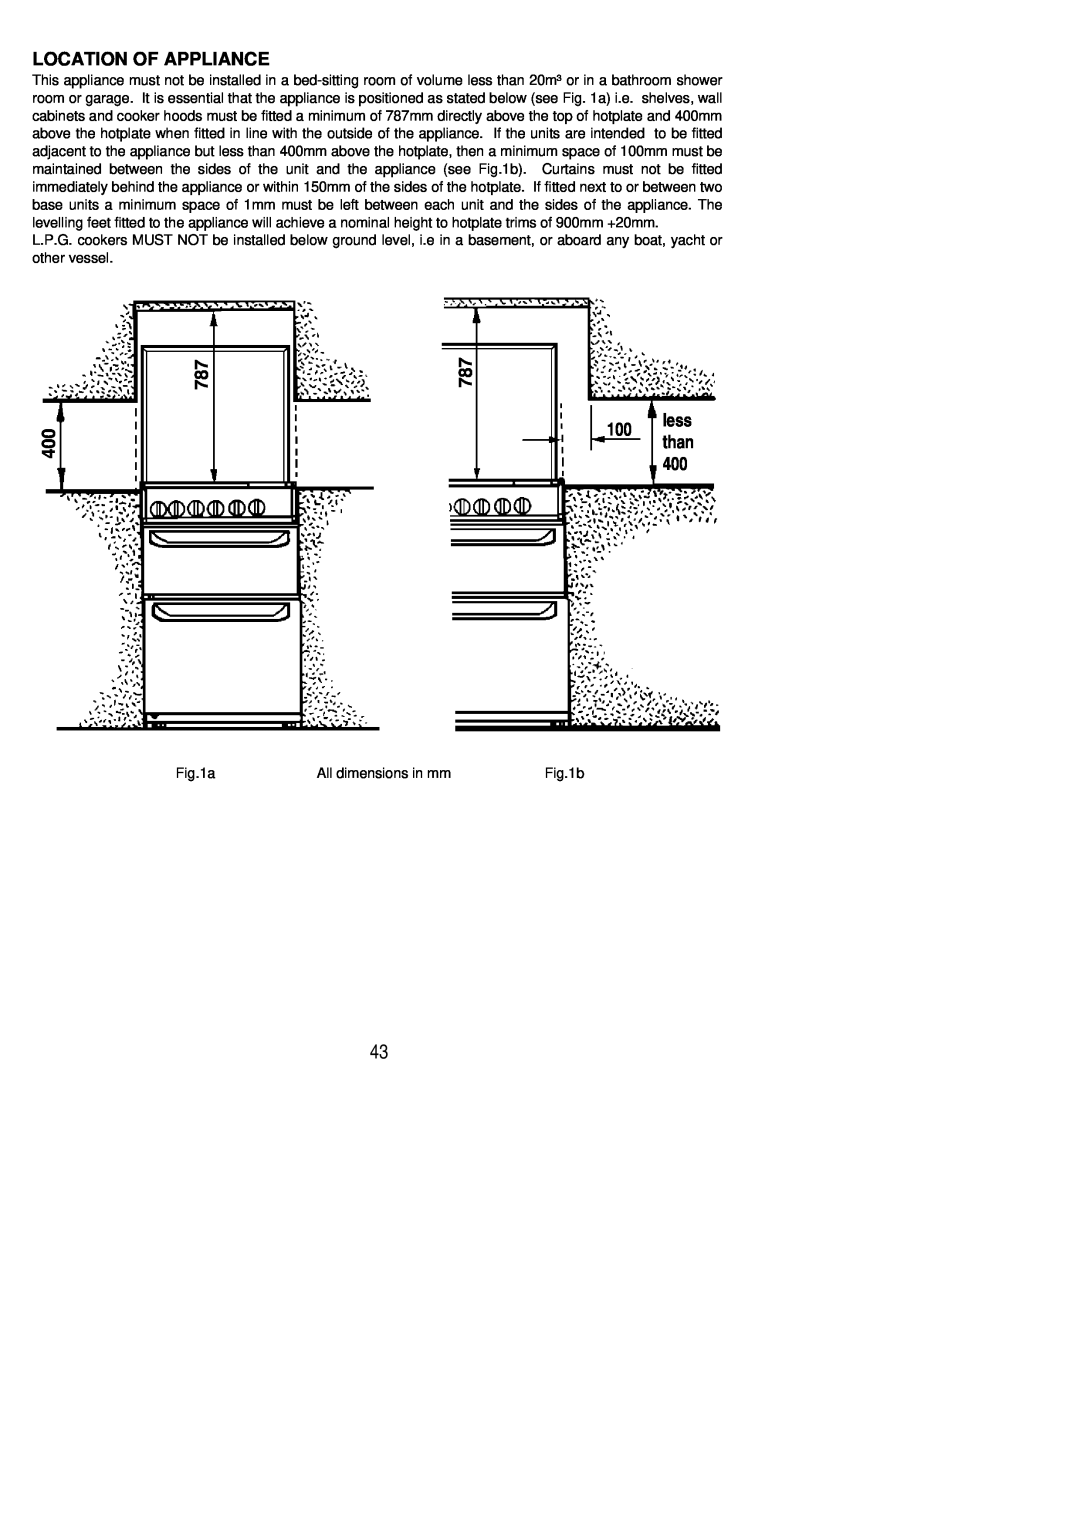 Parkinson Cowan SIG 554 installation instructions Location Of Appliance, less than 400, All dimensions in mm, b 